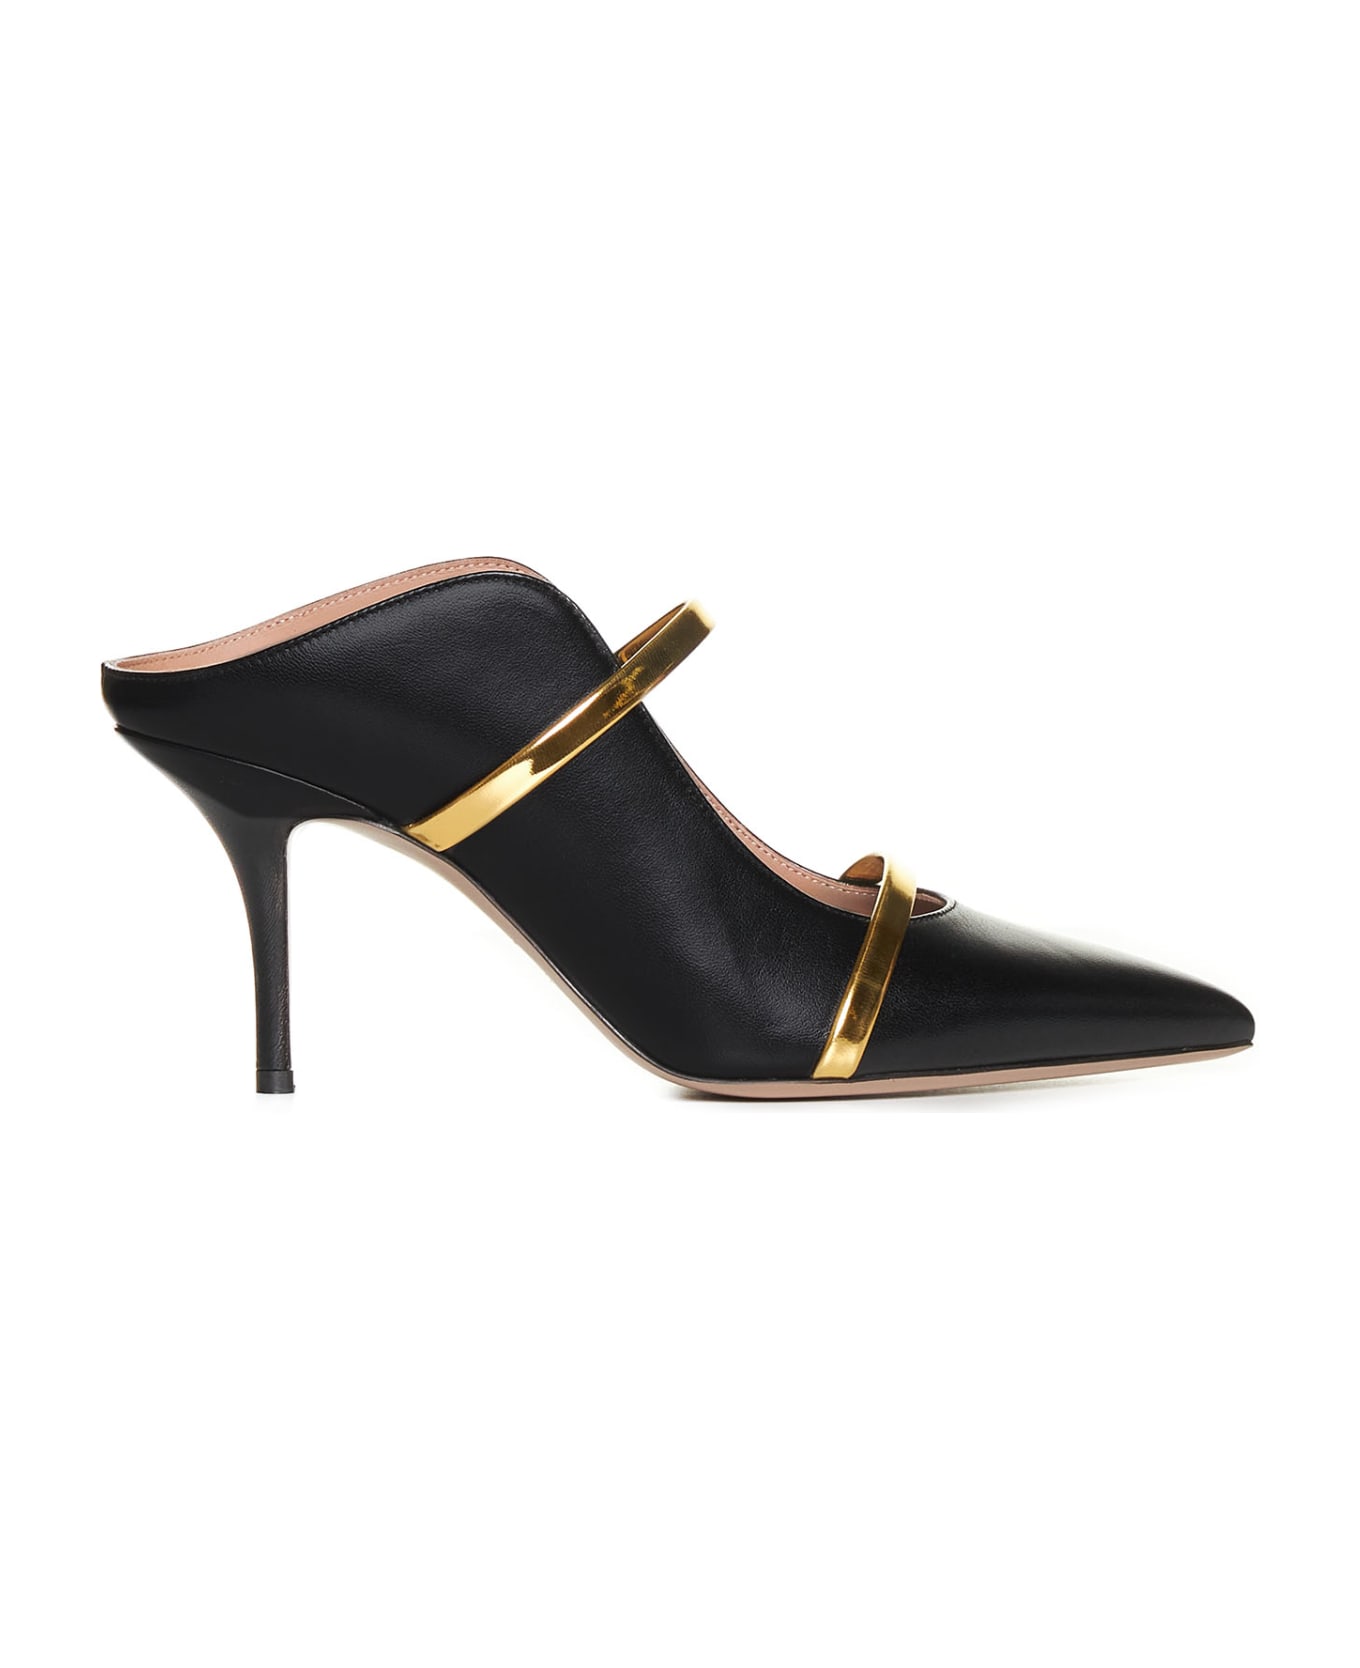 Malone Souliers Sandals - Black/gold